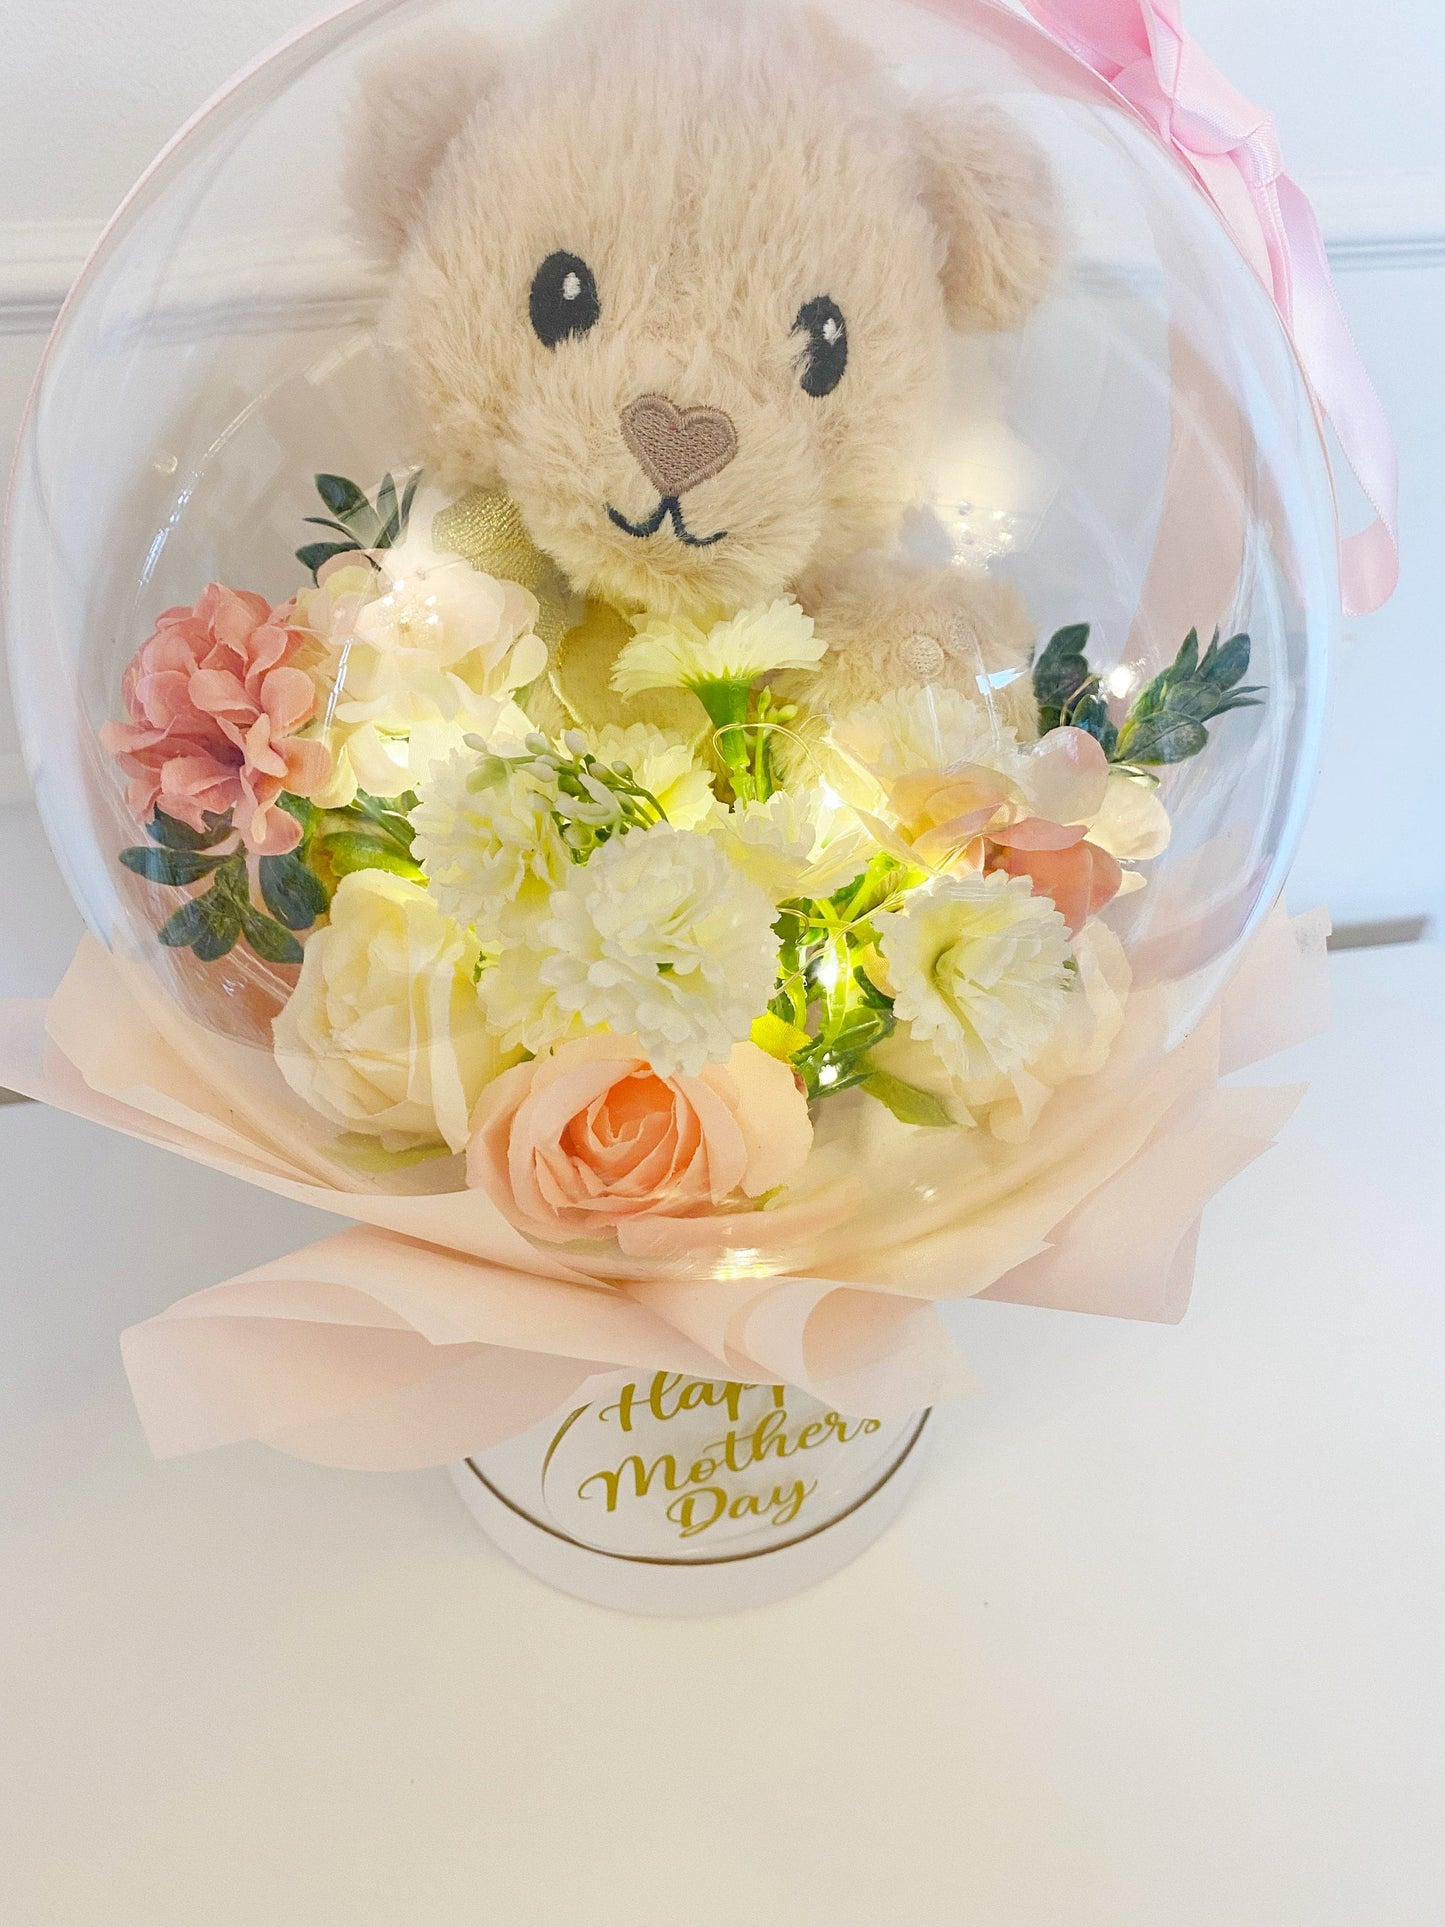 Mother's Day Acrylic Bobo Balloon Artificial Flower Bouquet, Teddy, Floral, Gift for Mum, Mother's Day Gift, Hat Box, First Mothers Day